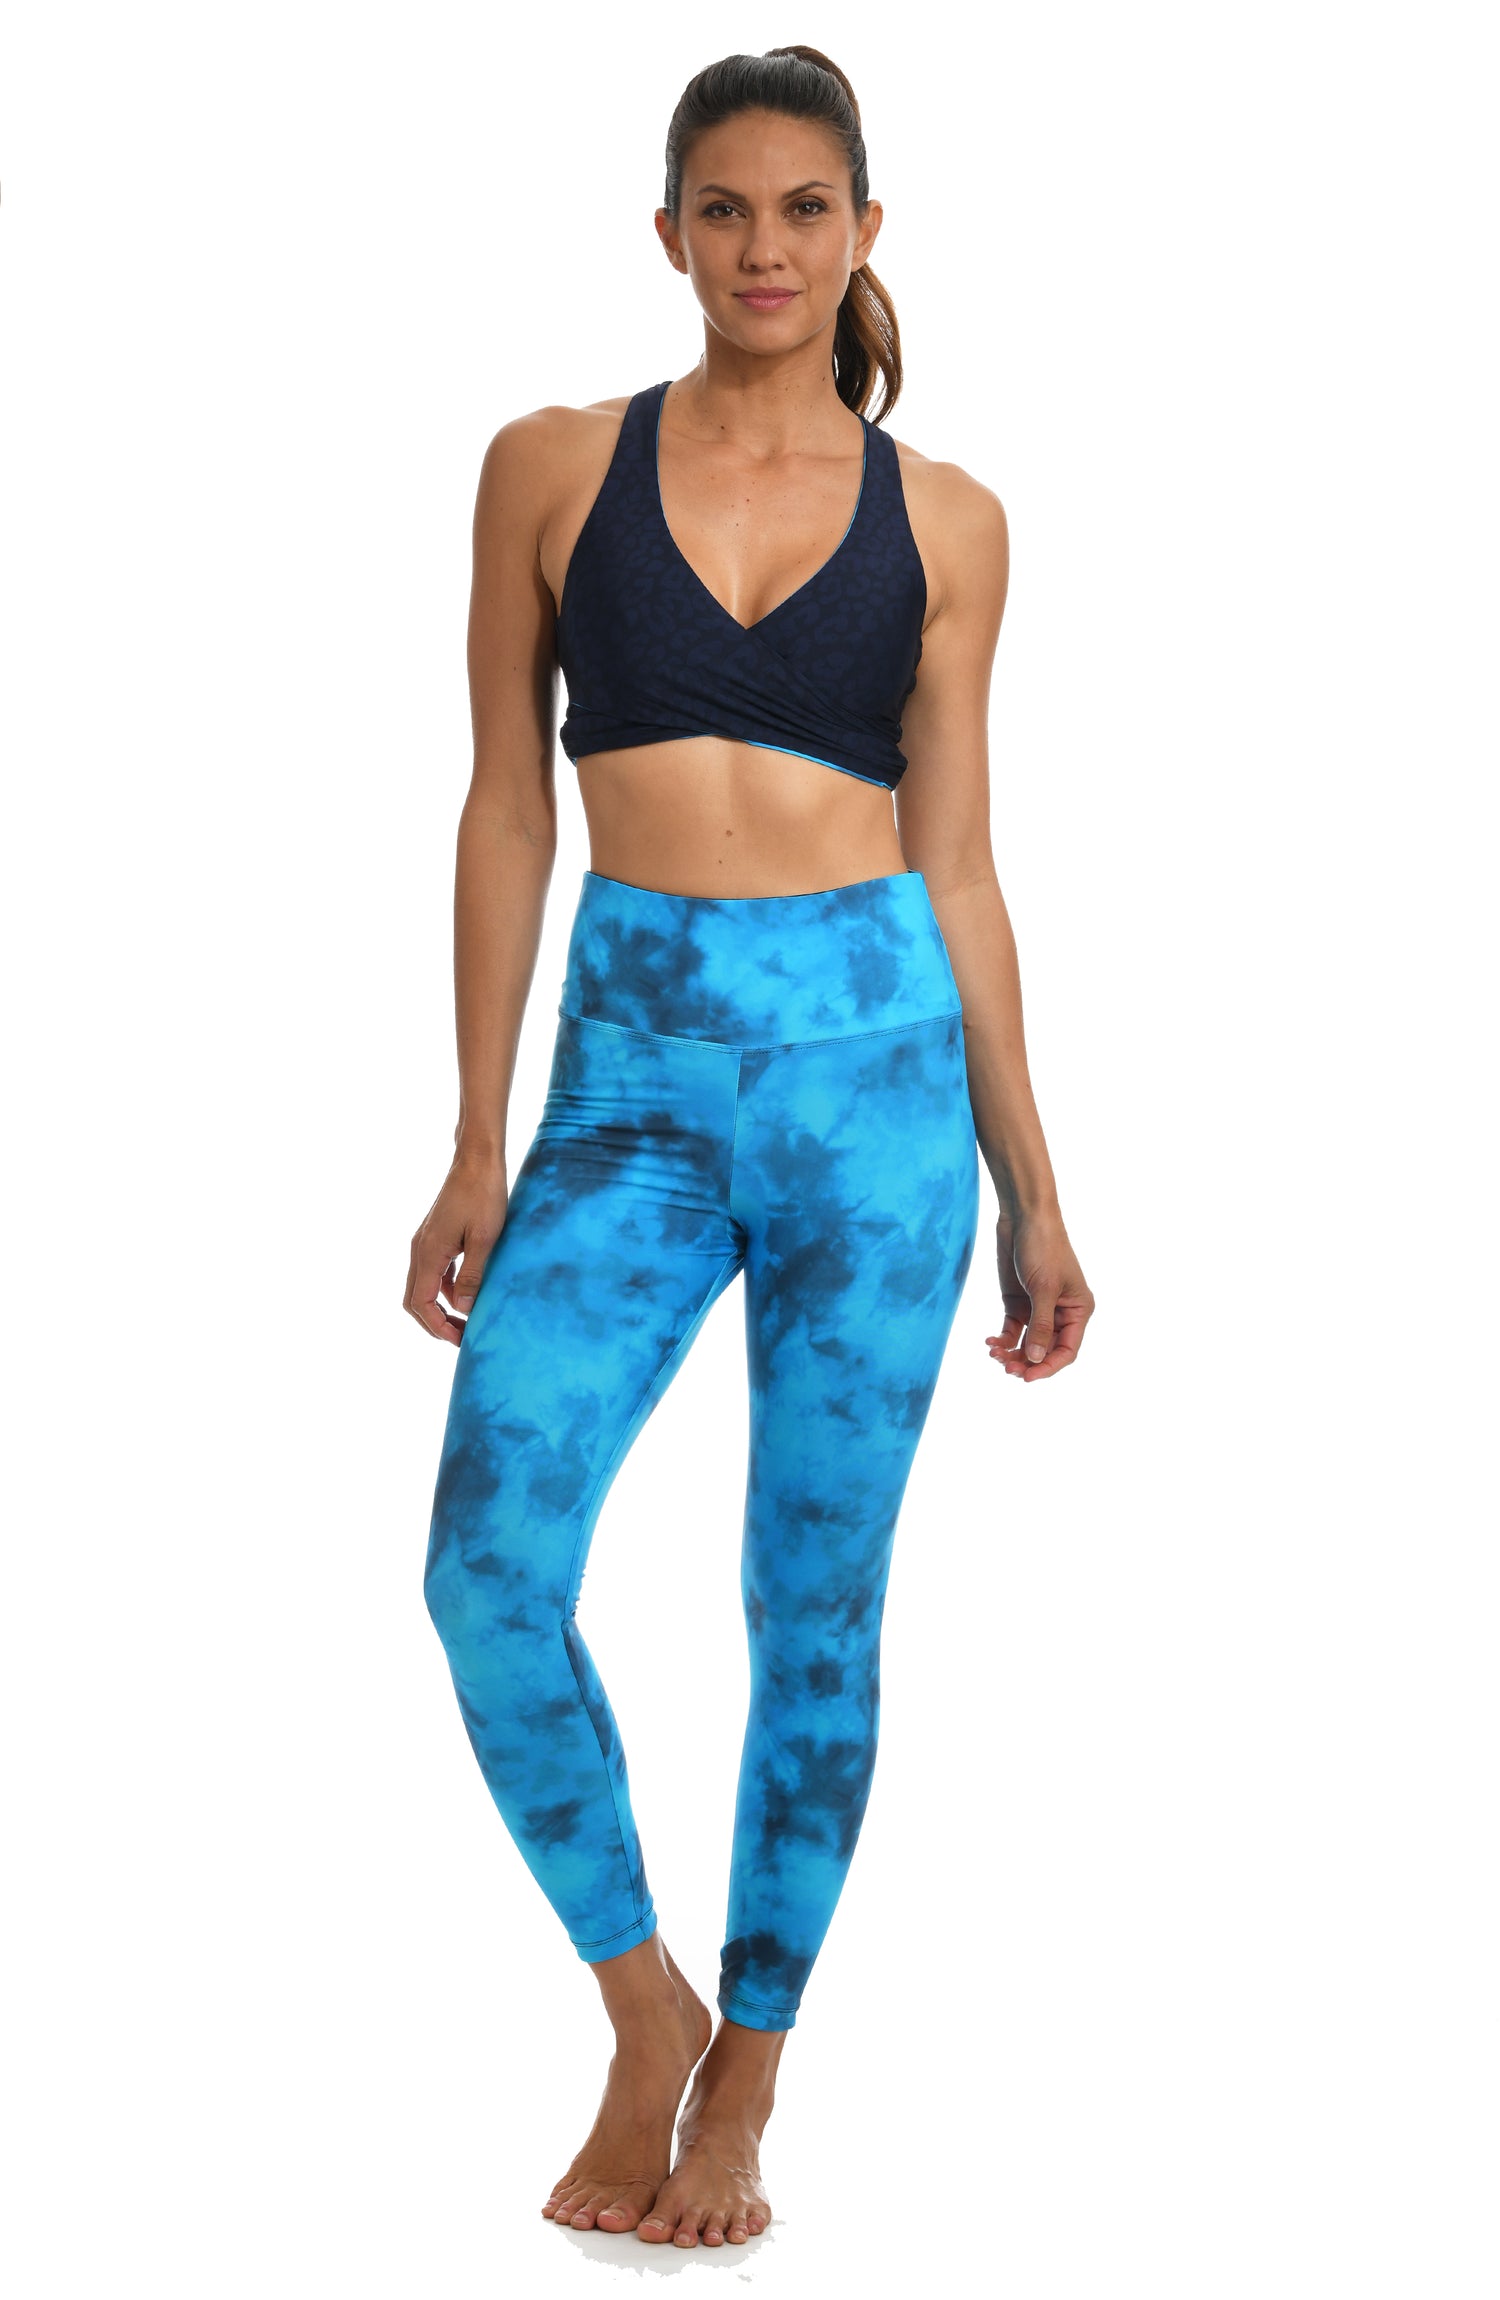 Model is wearing a blue dreamy cloud-inspired printed high waist legging from our Head in the Clouds collection.